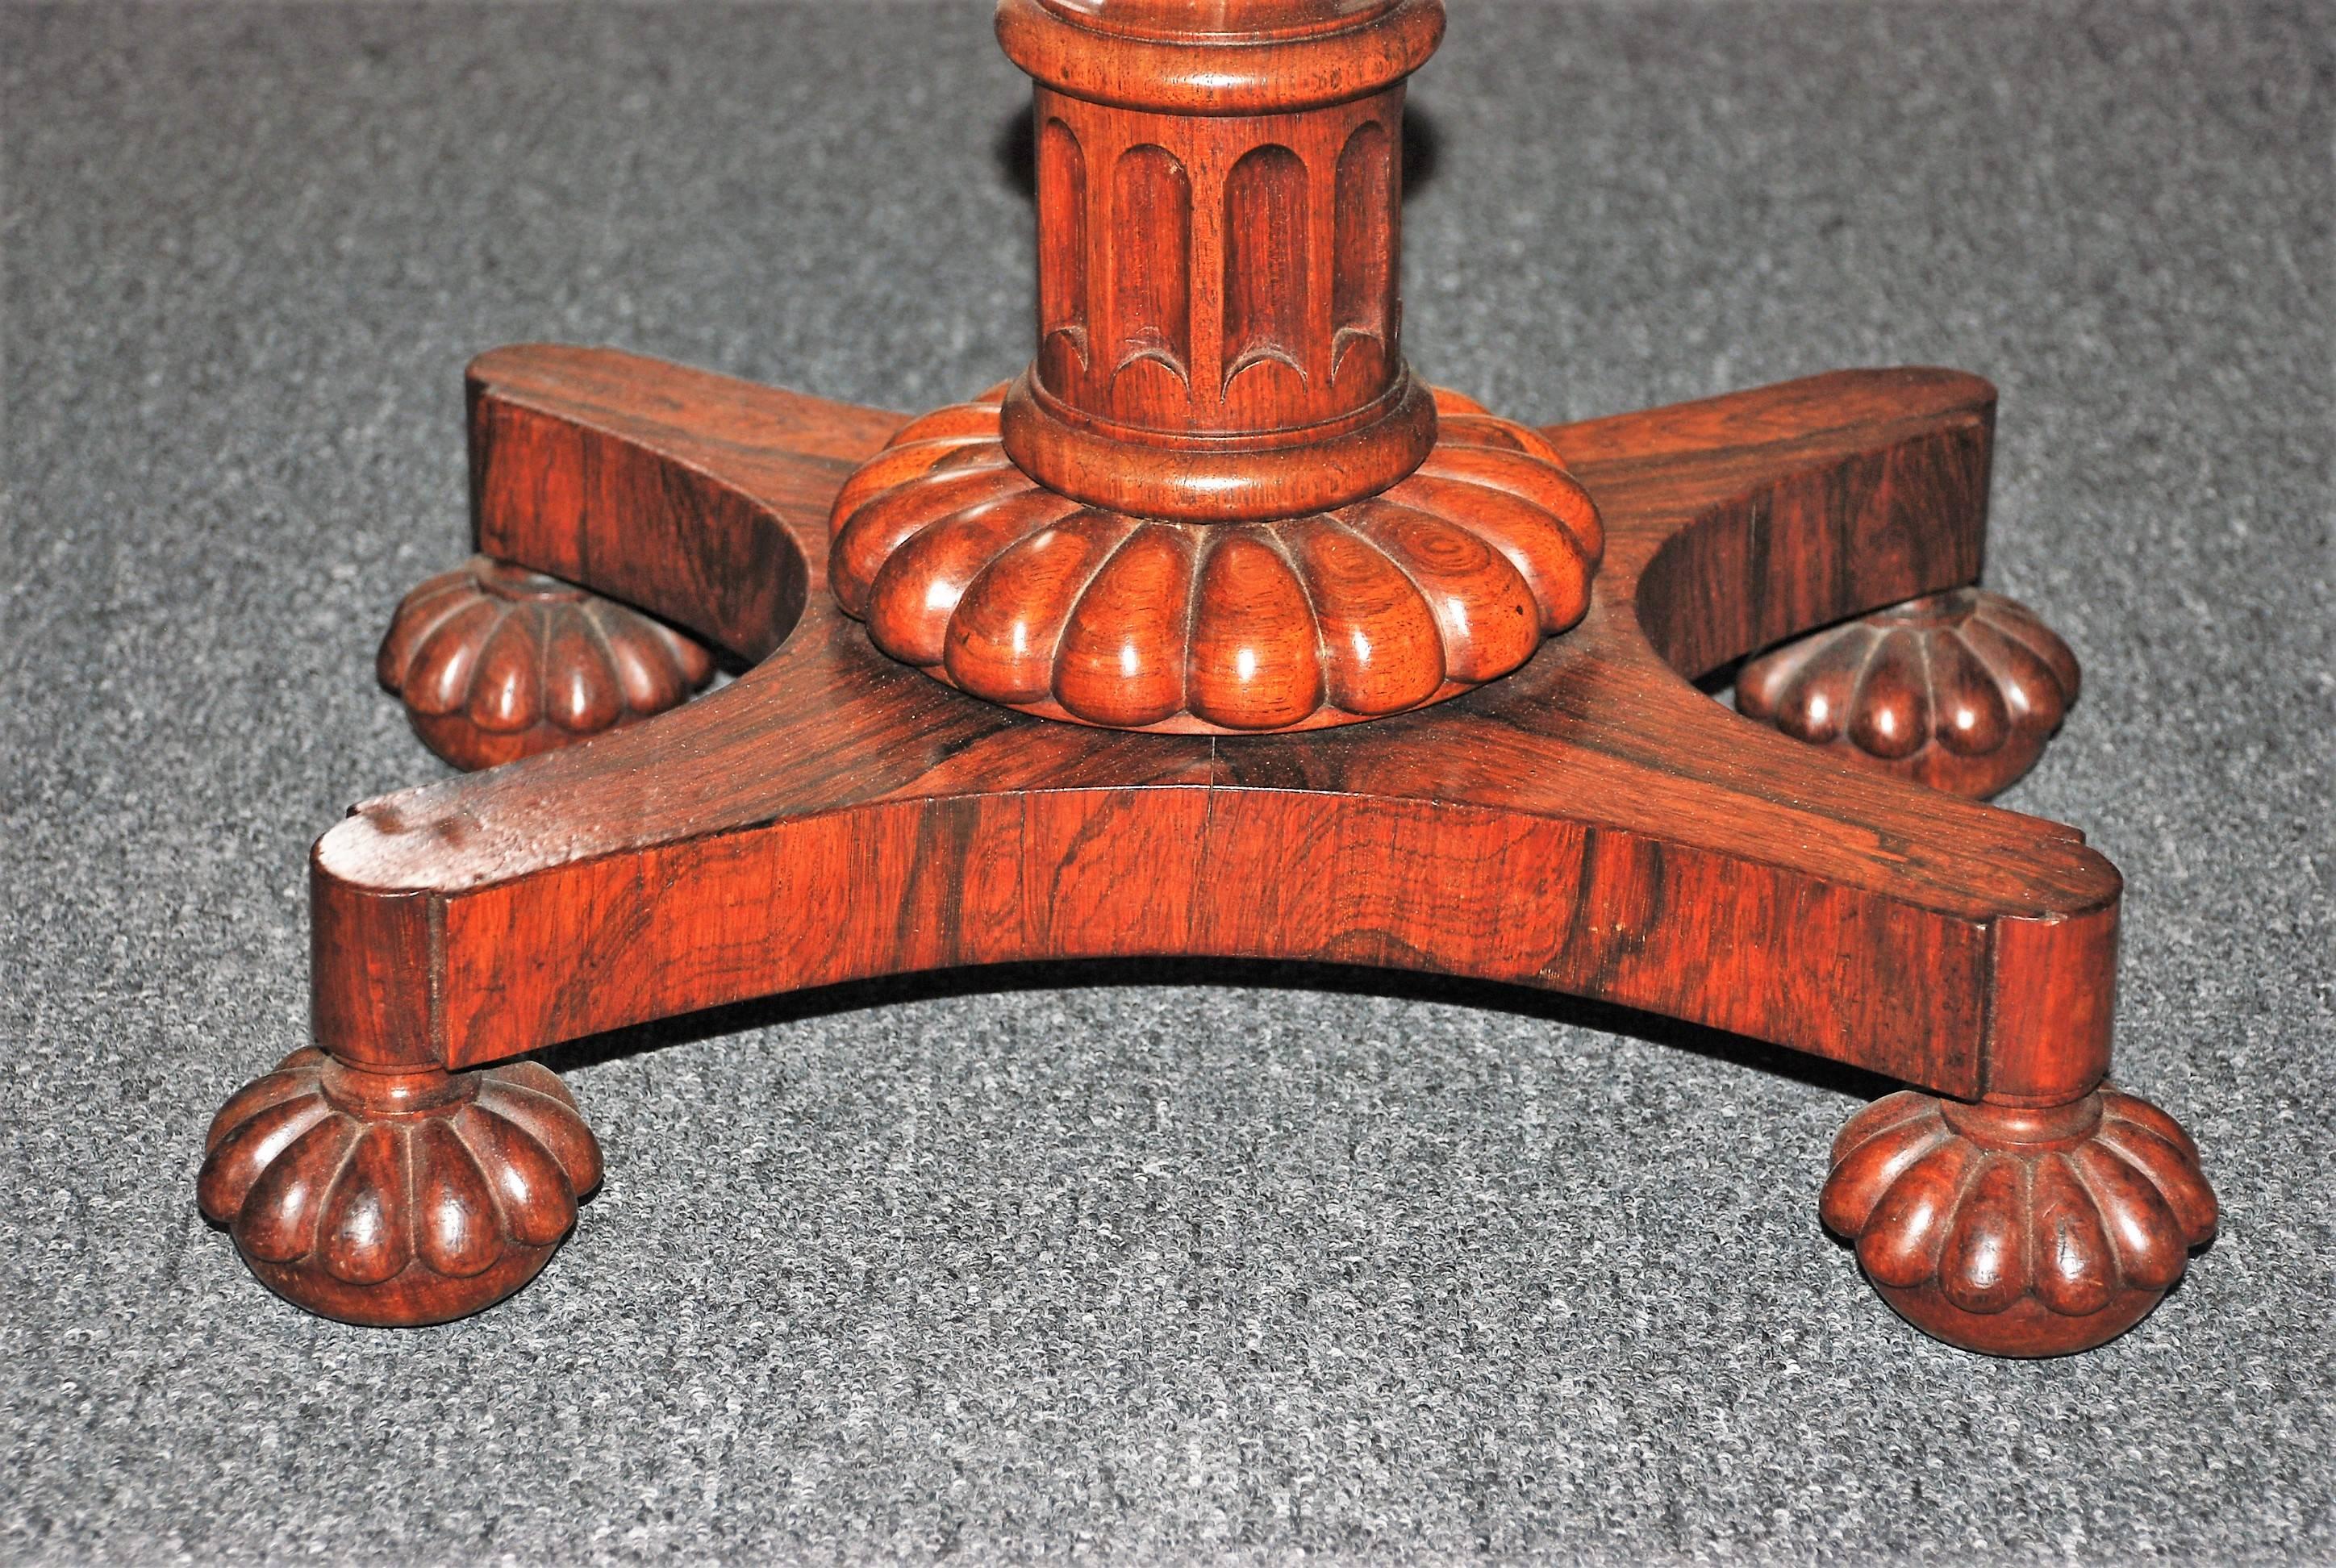 Antique Georgian hand-carved rosewood tea poy with bun feet and castors.